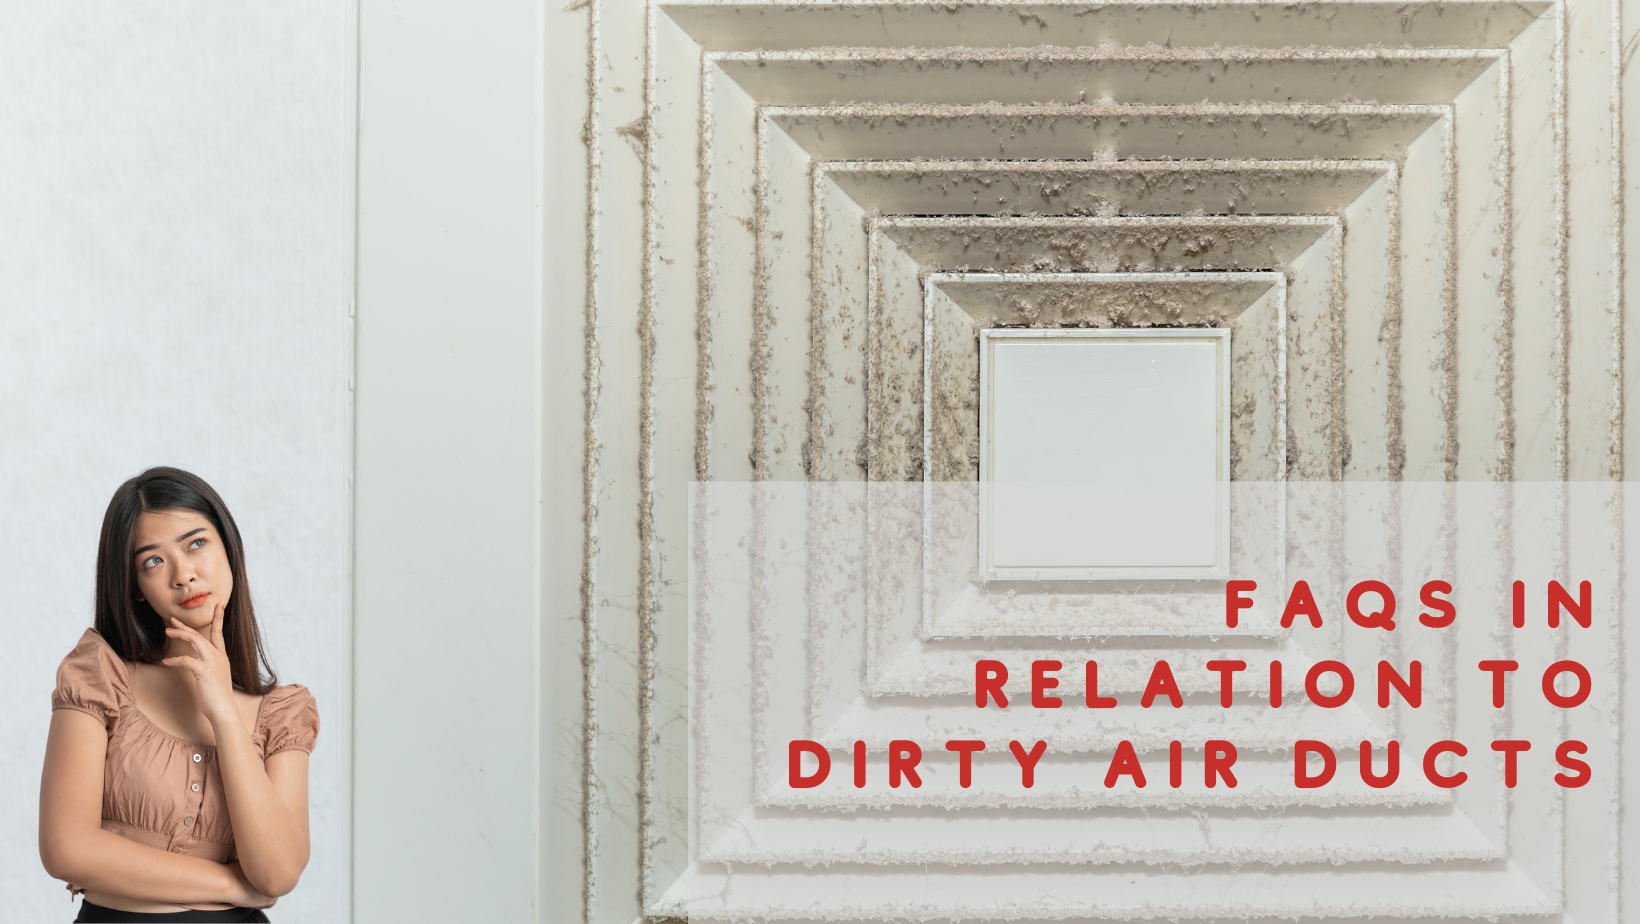 FAQS in relation to dirty air ducts